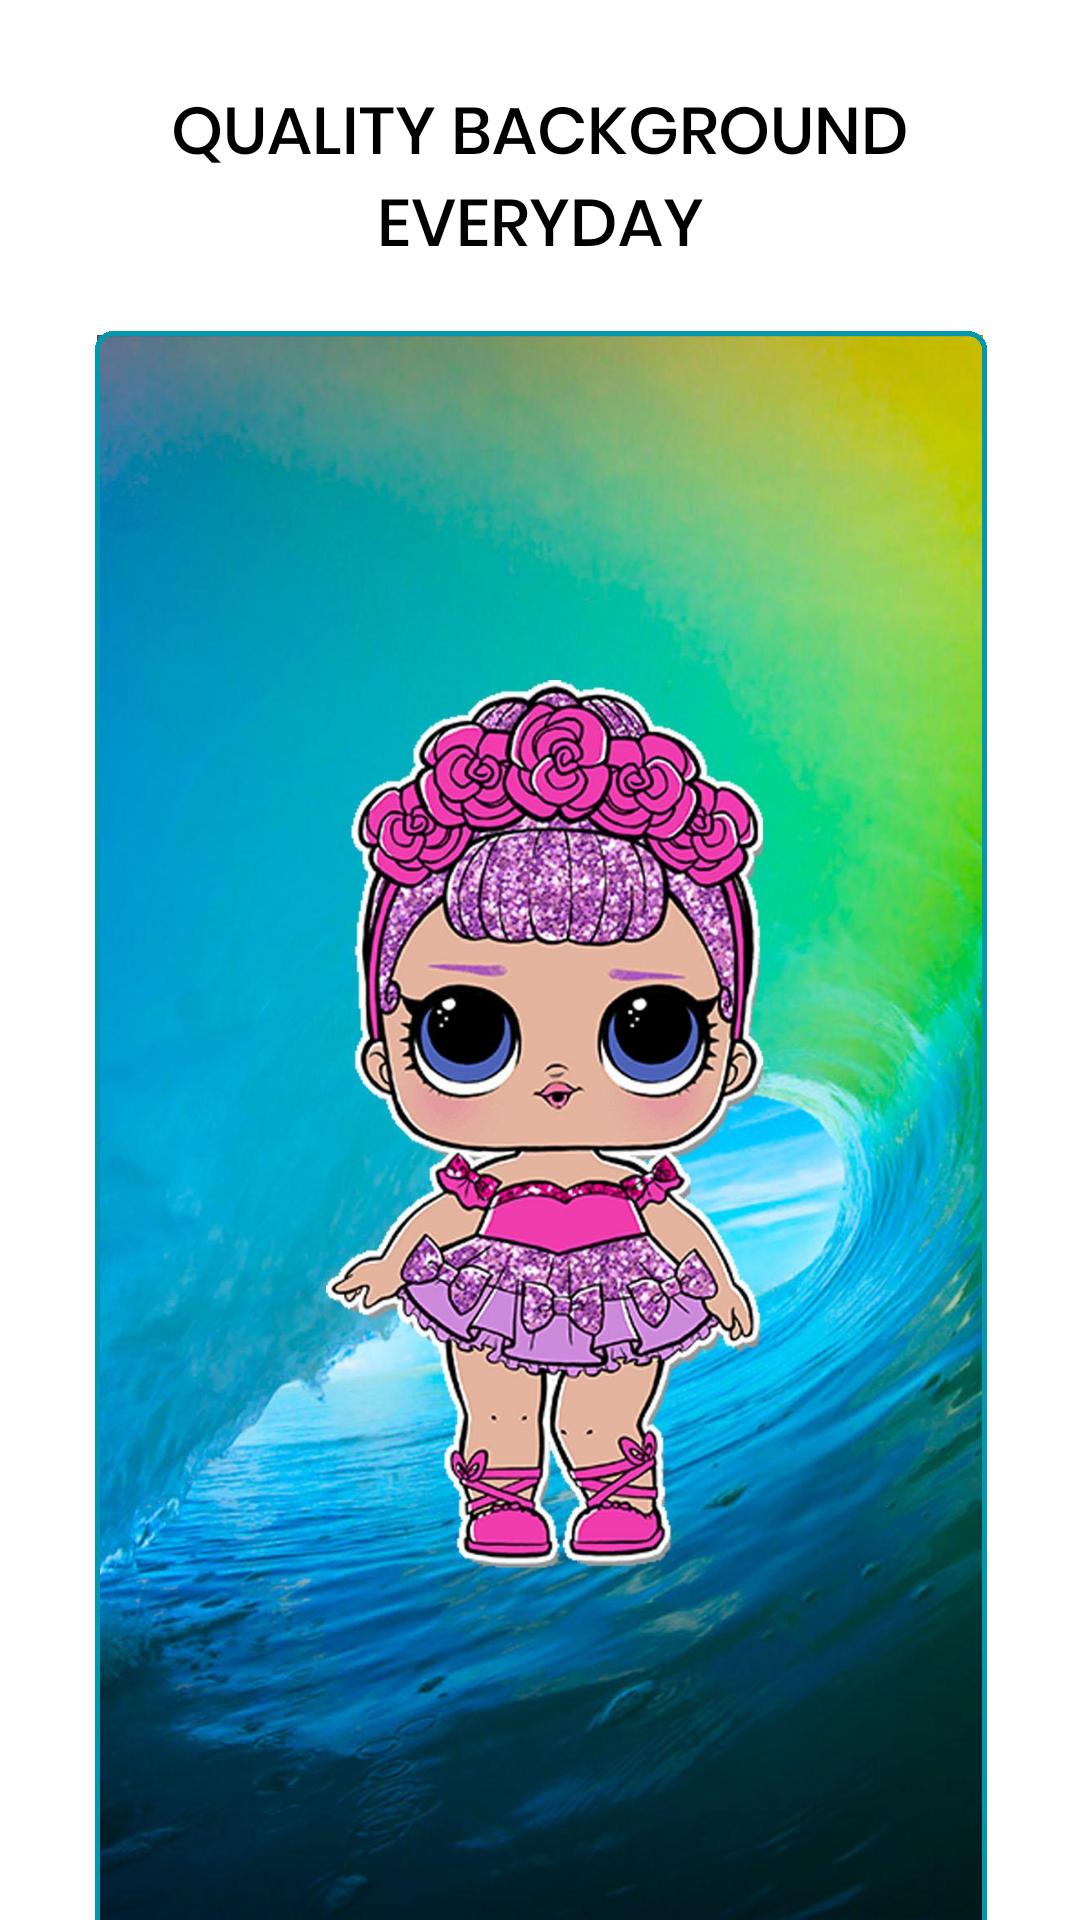 Cute Doll Surprise Wallpapers - LOL Surprise Dolls for Android - APK